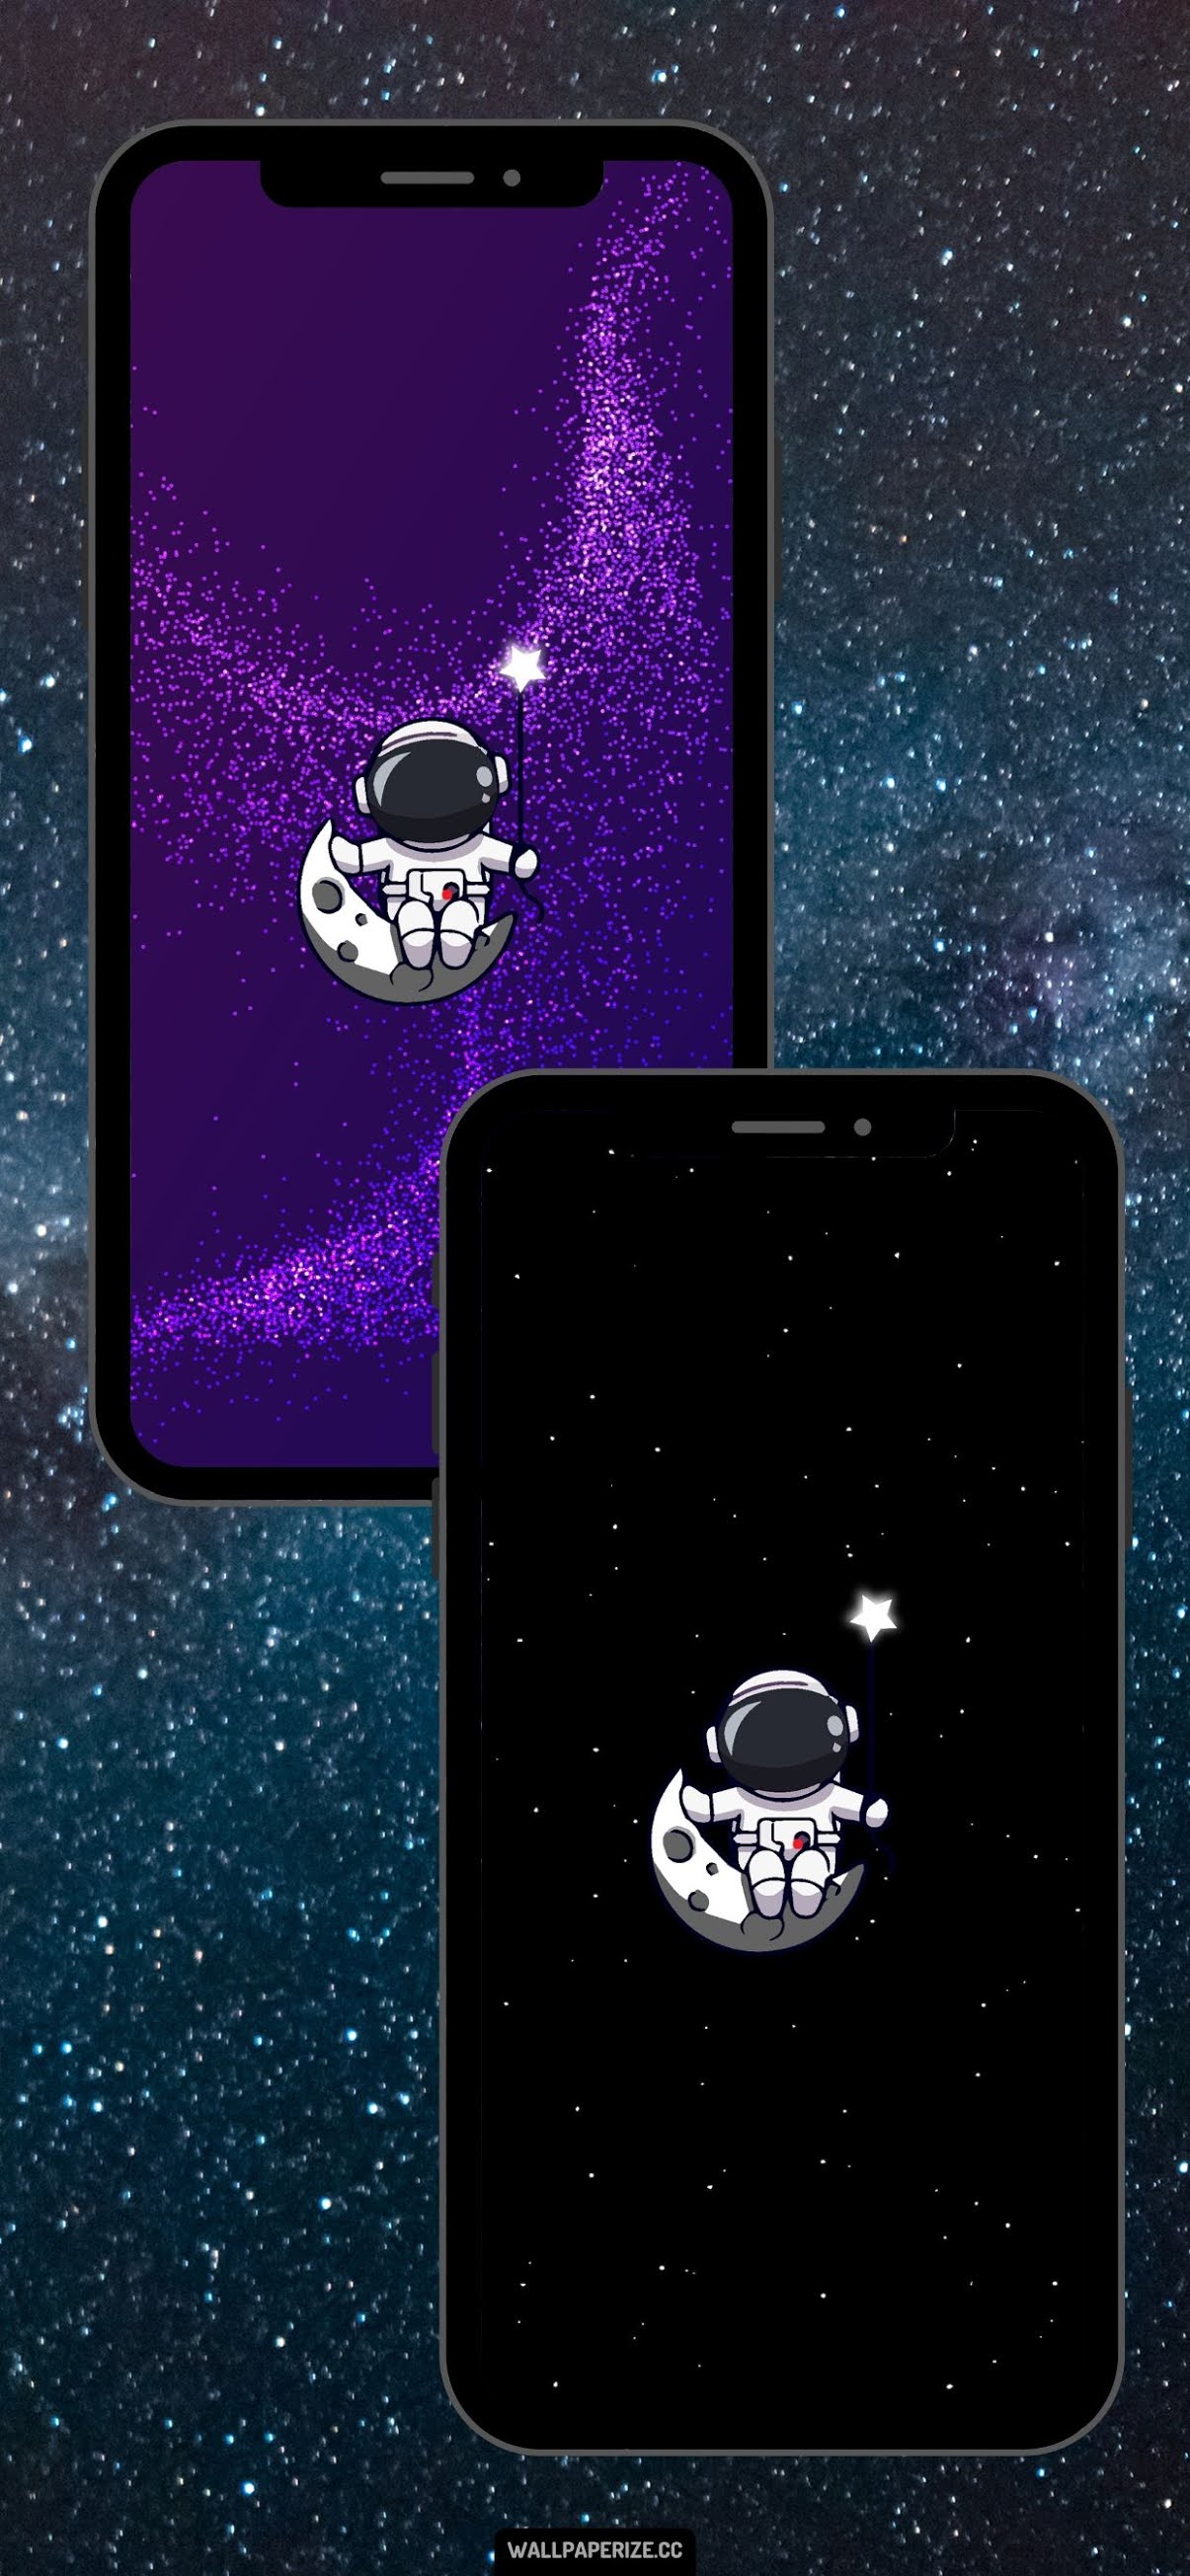 Cool phone wallpapers - Cute Astronaut